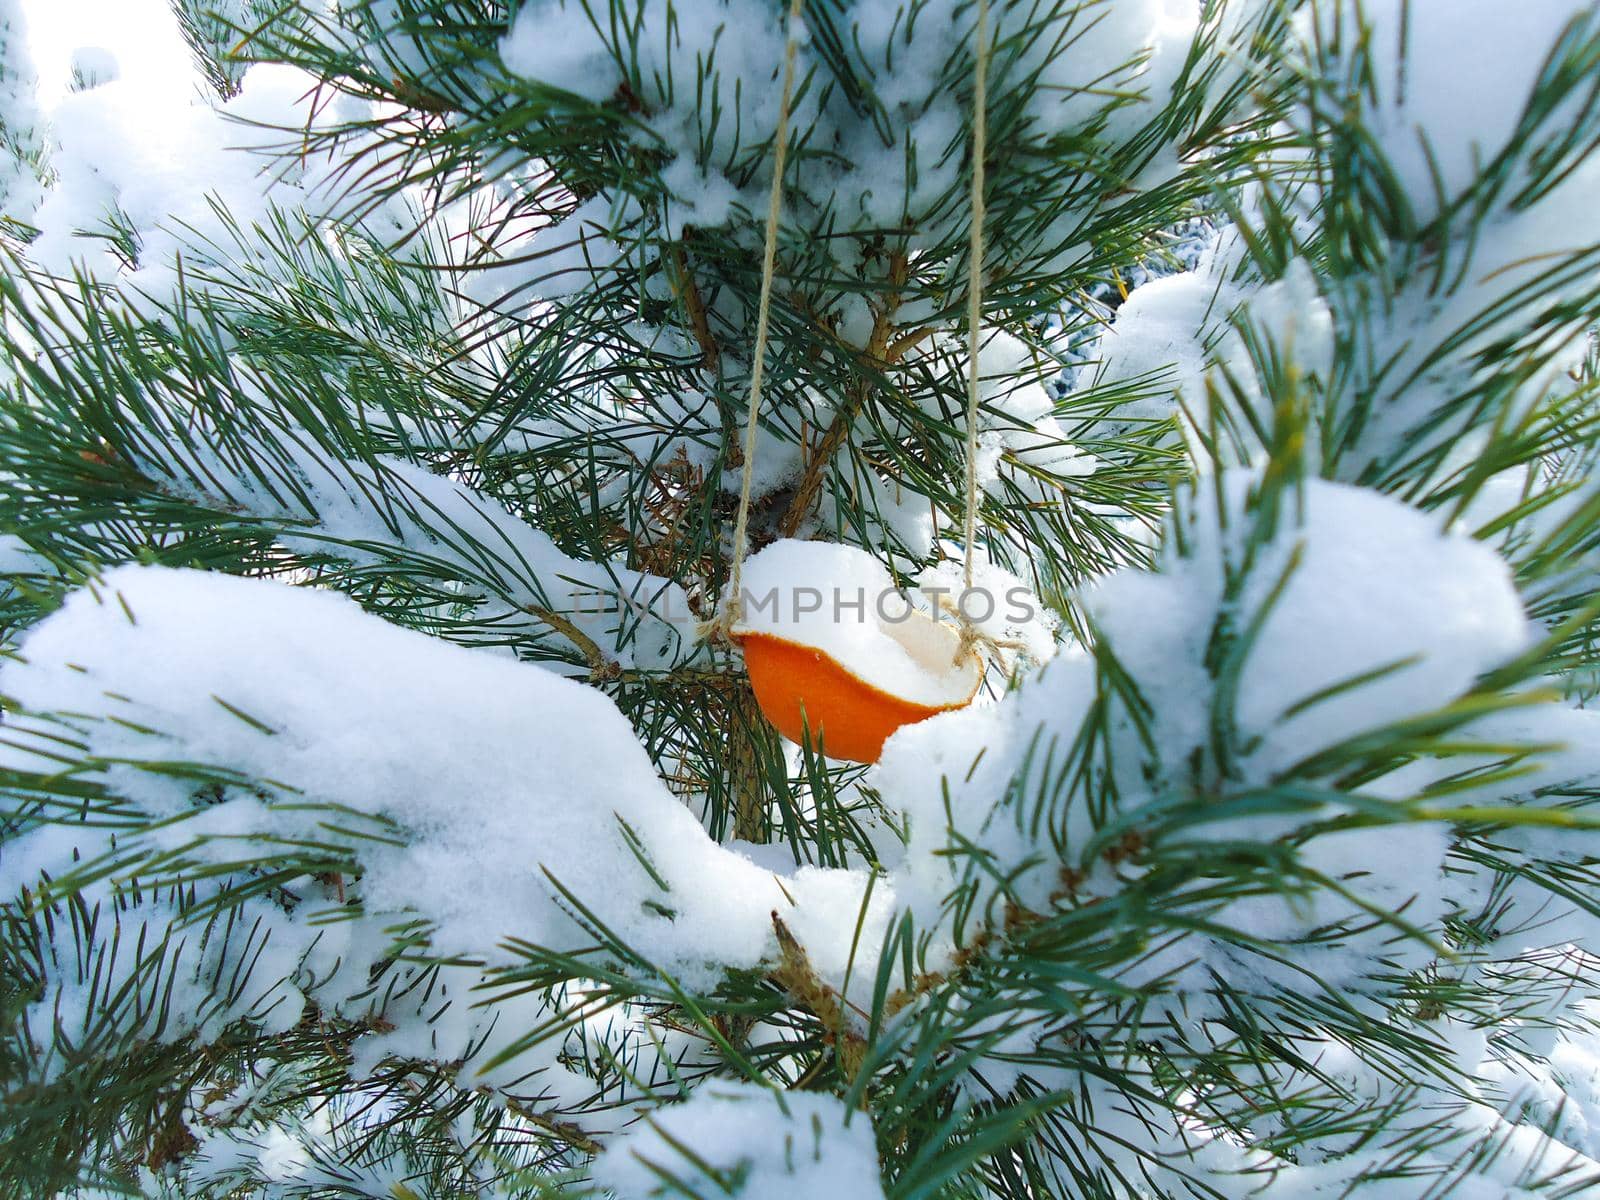 Caring for birds in the winter. A bird feeder made of mandarin peel hangs on a snowy pine branch.